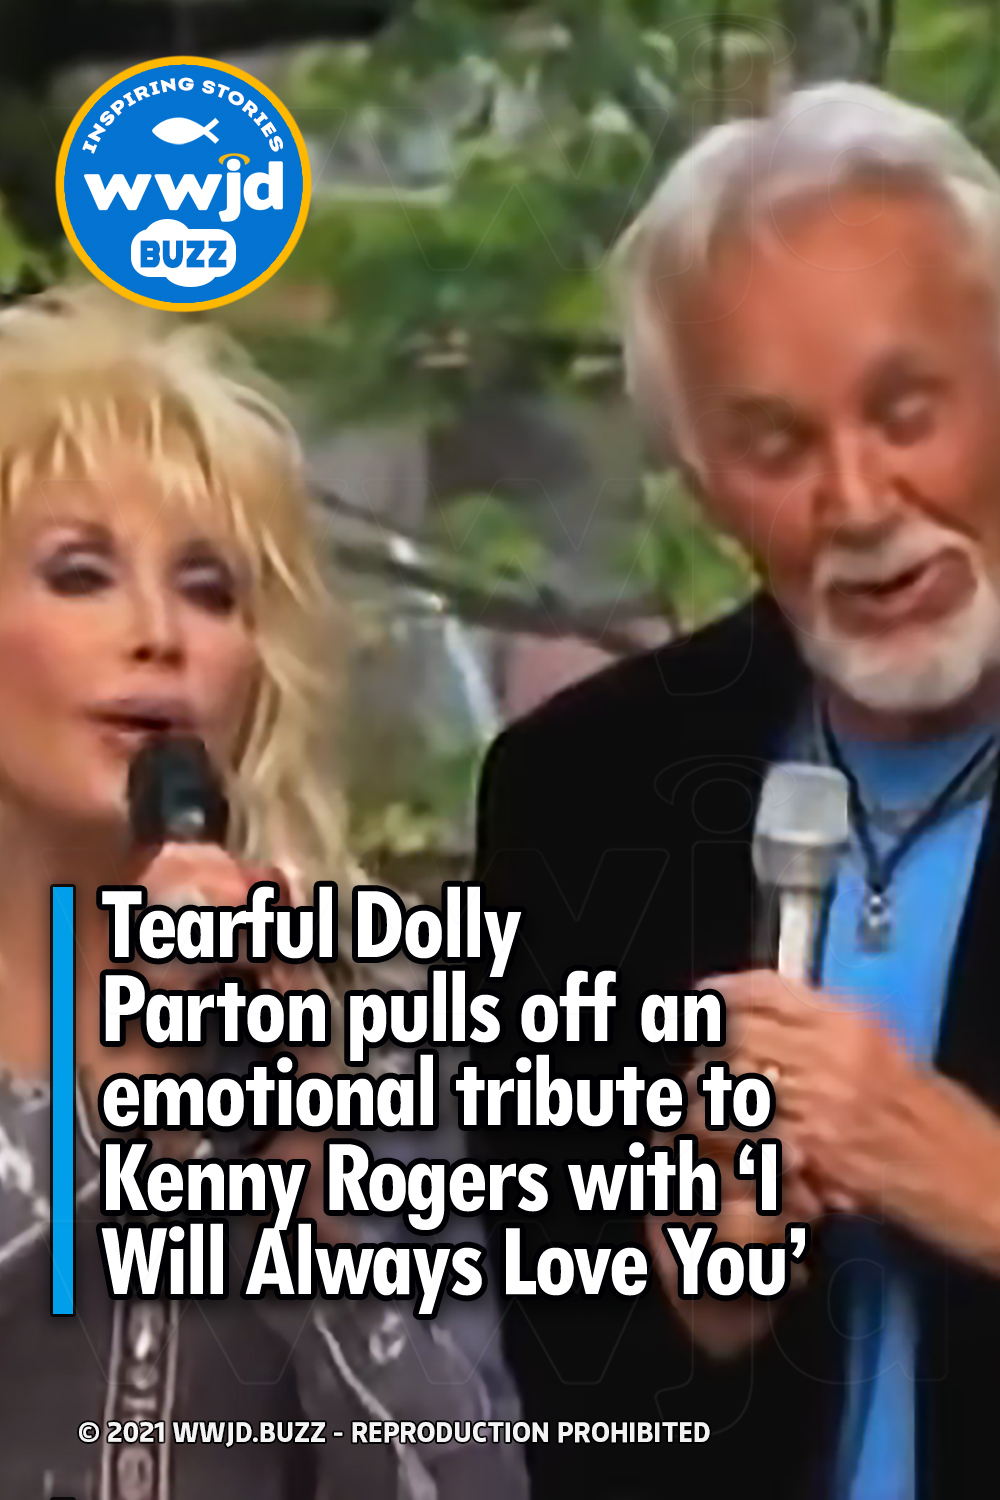 Tearful Dolly Parton pulls off an emotional tribute to Kenny Rogers with ‘I Will Always Love You’